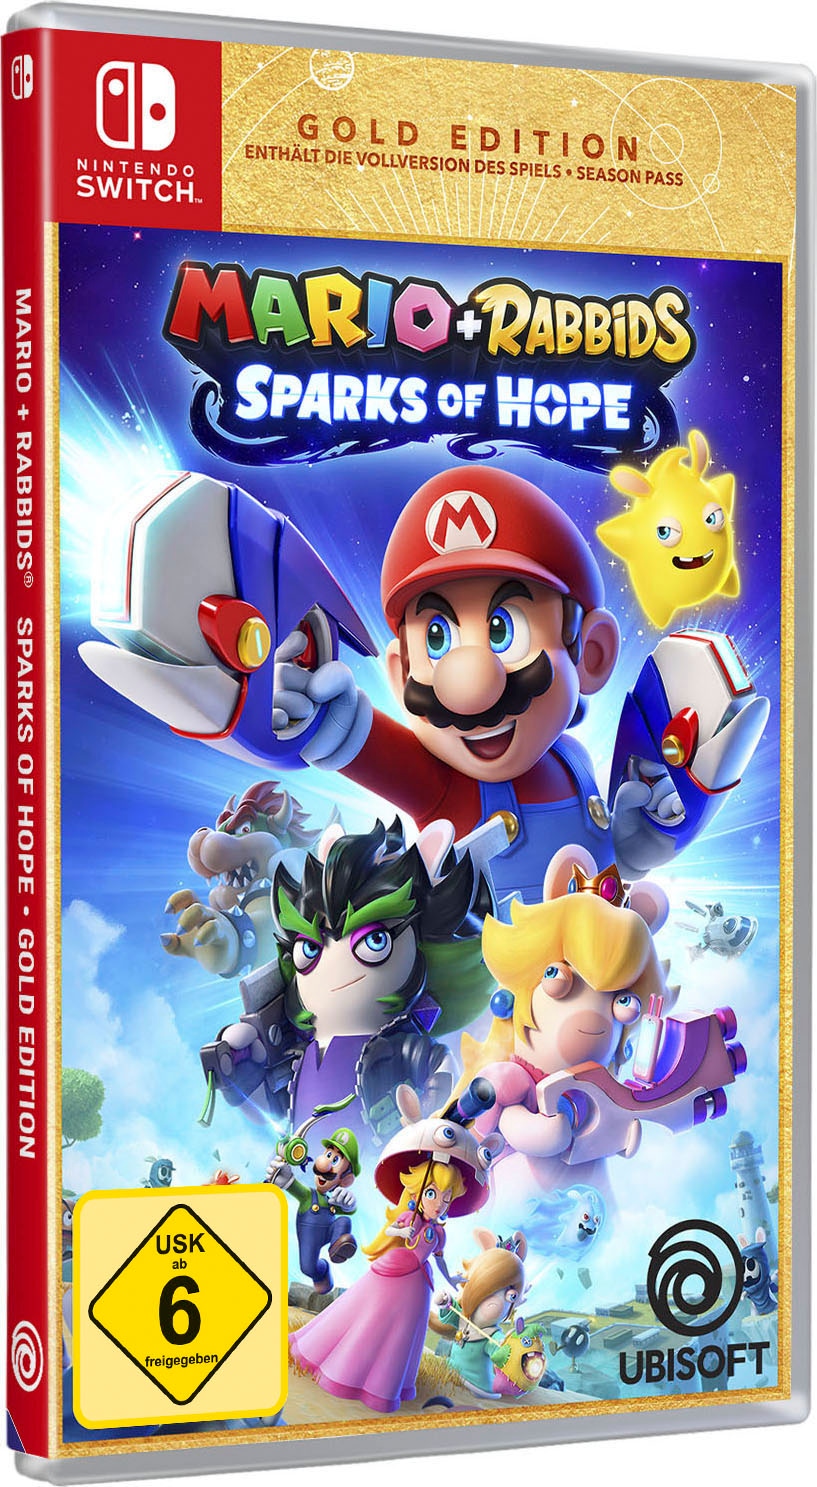 Spielesoftware »NSW Mario + Rabbids Sparks of Hope - Gold Edition«, Nintendo Switch